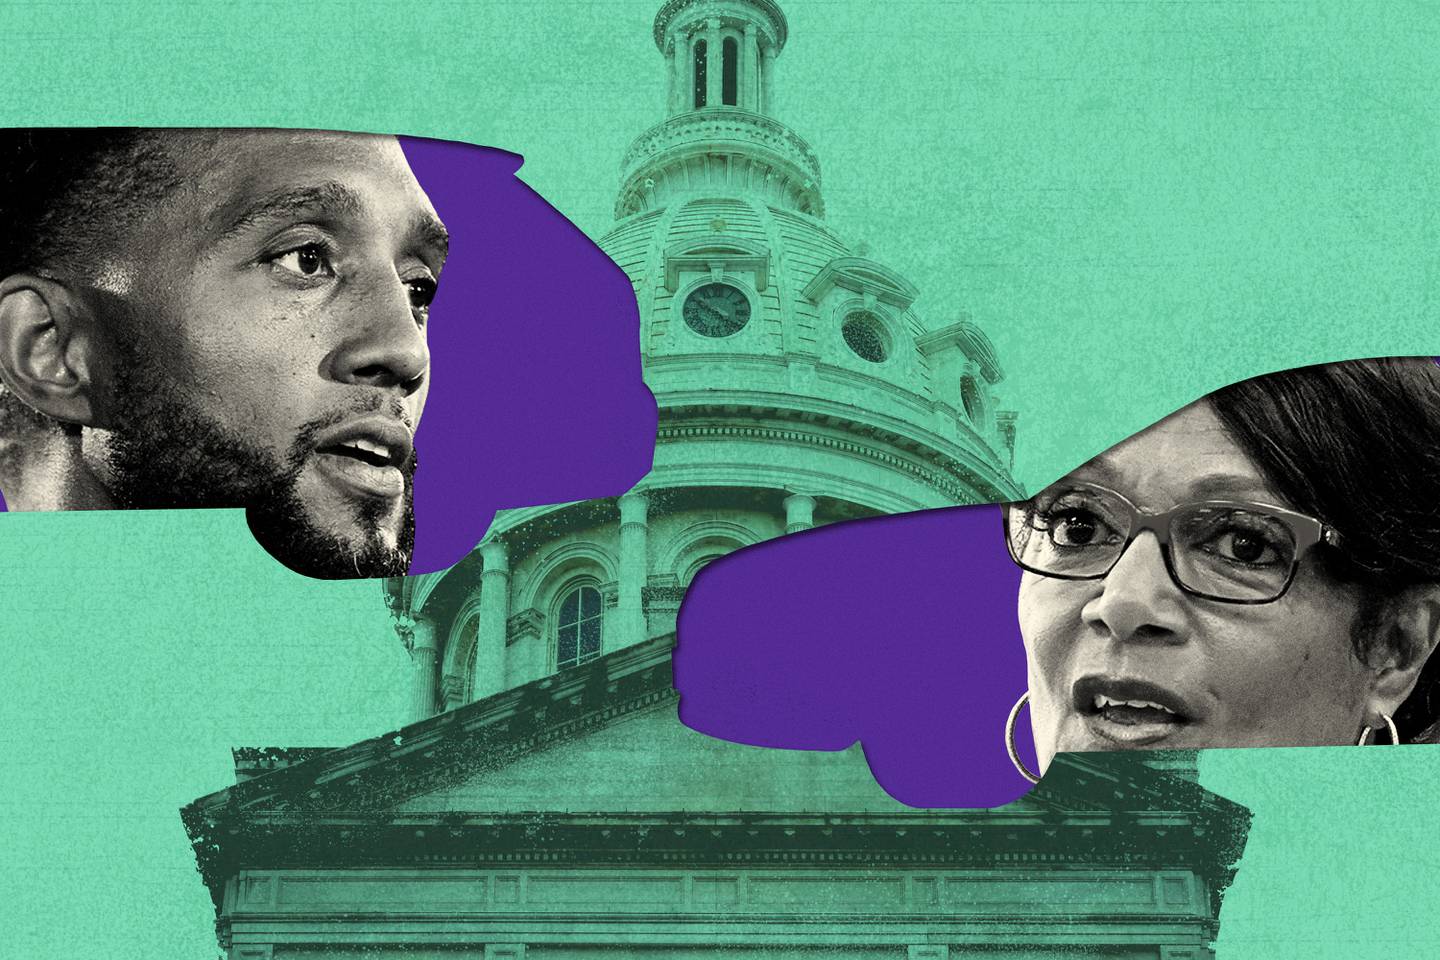 Photo illustration of Baltimore City hall’s tower against teal background. Mayor Brandon Scott and mayoral candidate Sheila Dixon’s faces are visible in two car-shaped cut outs on either side of city hall.